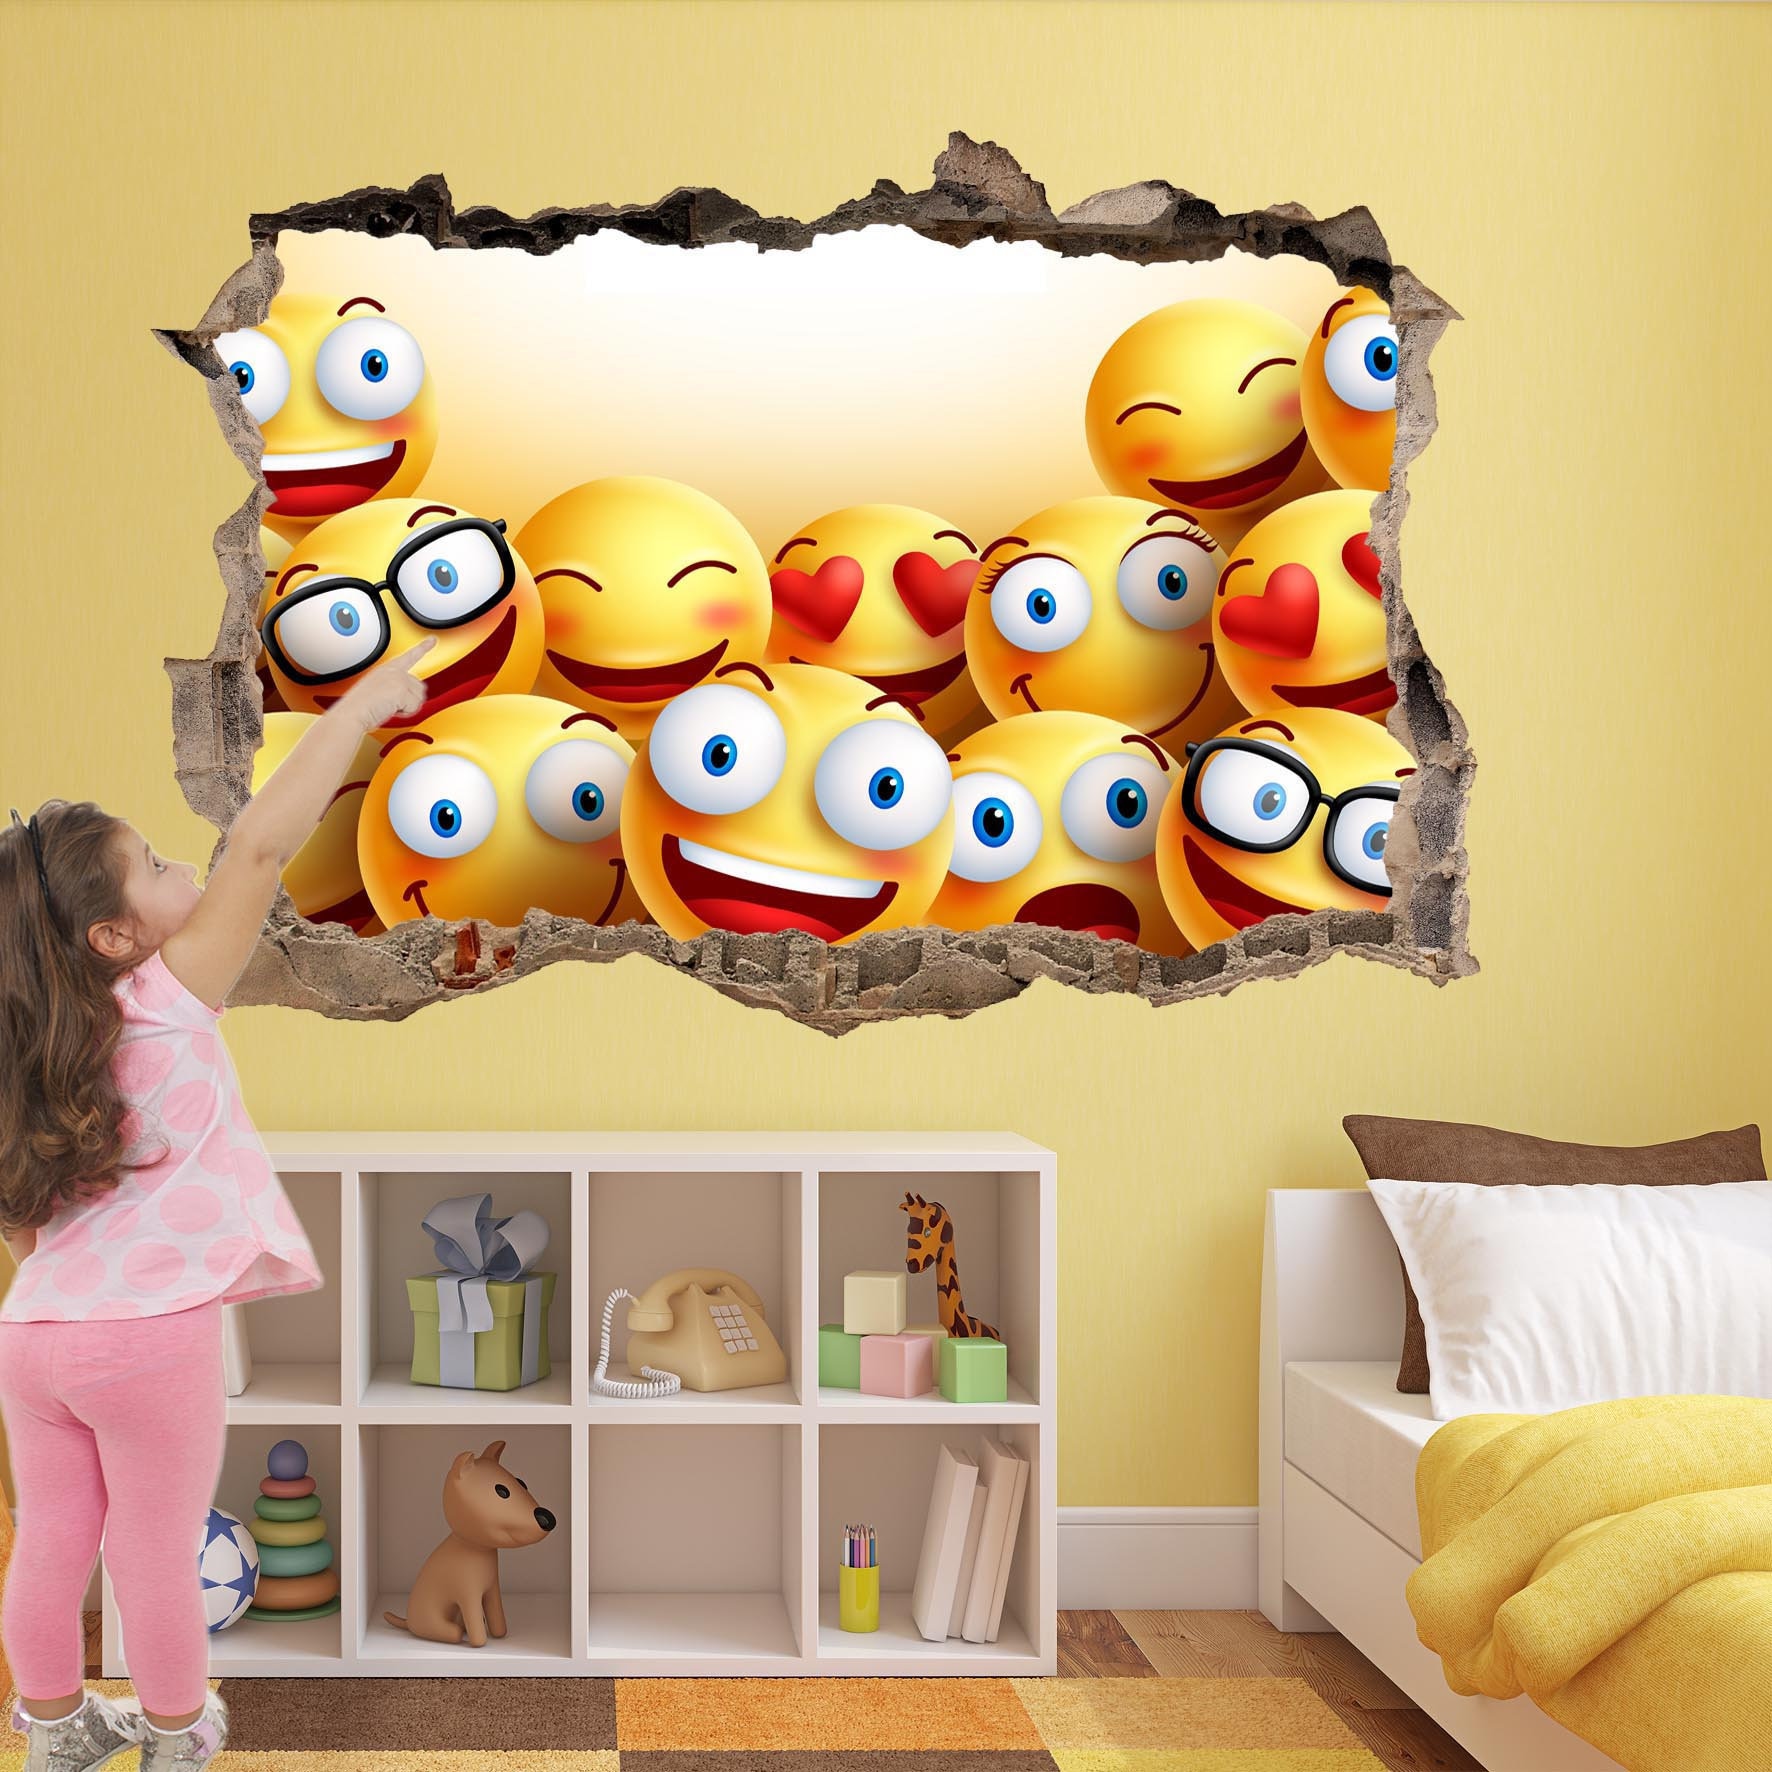 Emoji Faces Wall Decal Sticker Mural Poster Print Art Home - Etsy